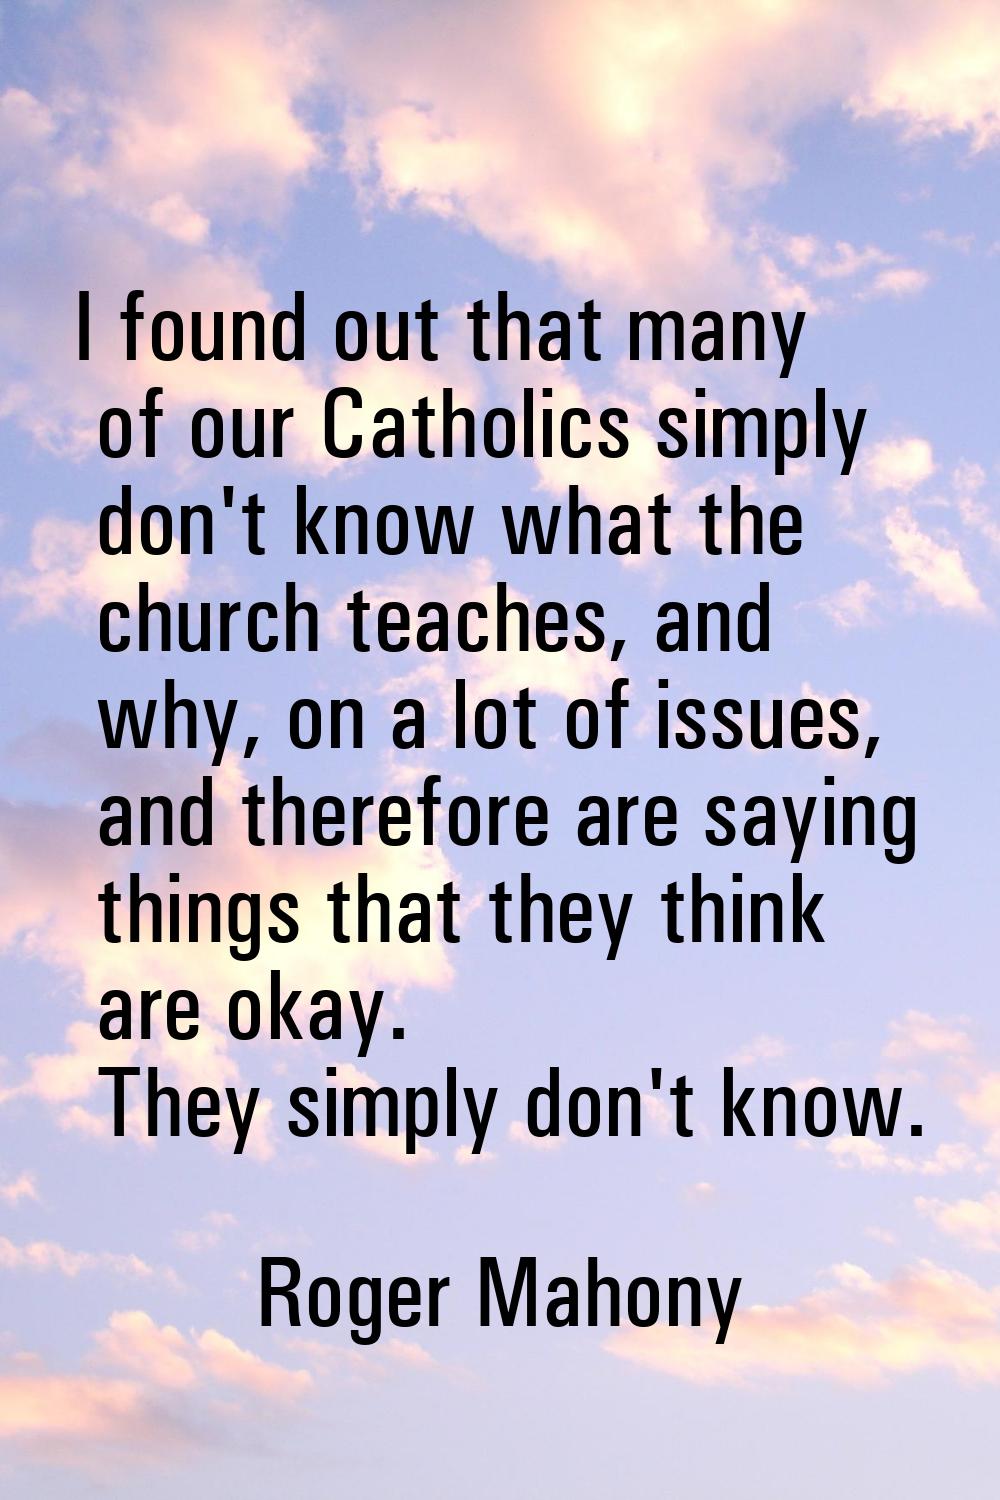 I found out that many of our Catholics simply don't know what the church teaches, and why, on a lot